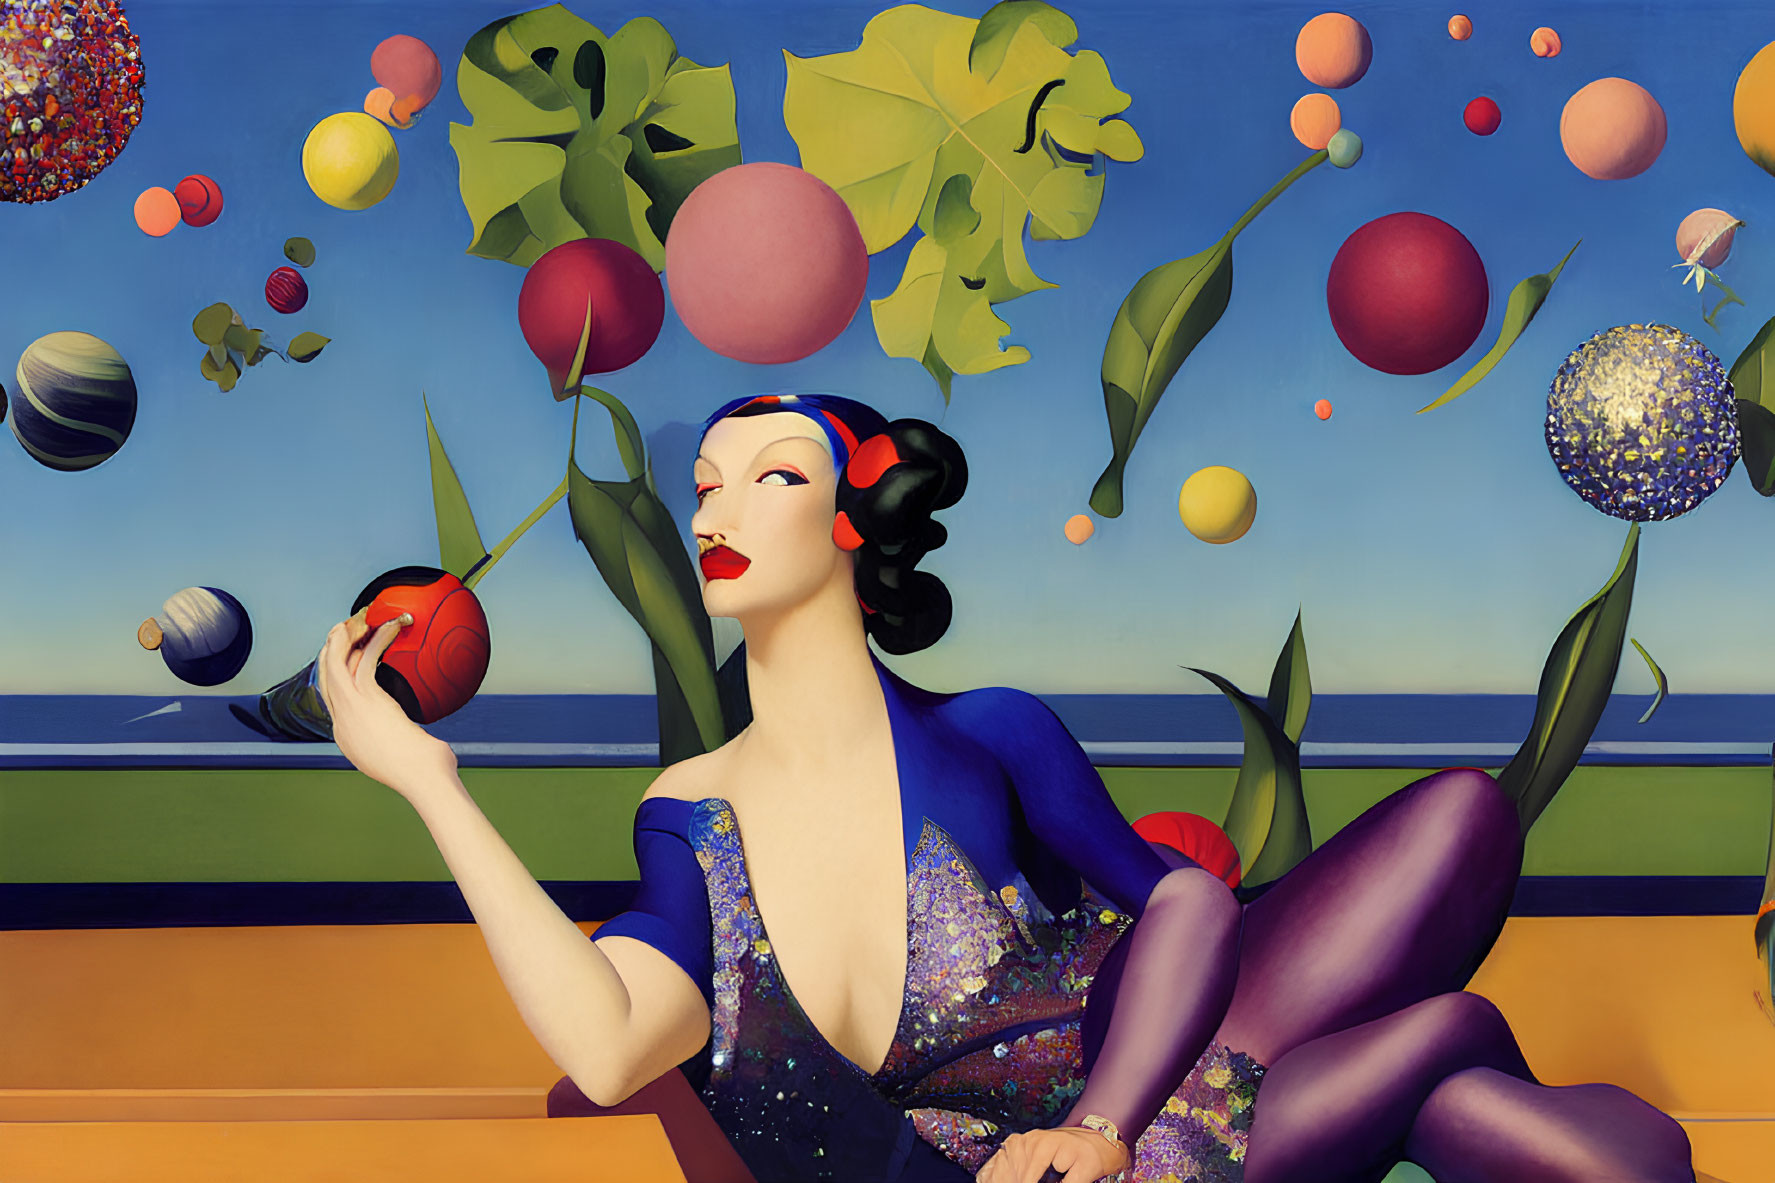 Stylized woman with red lips and blue attire in surreal sea landscape